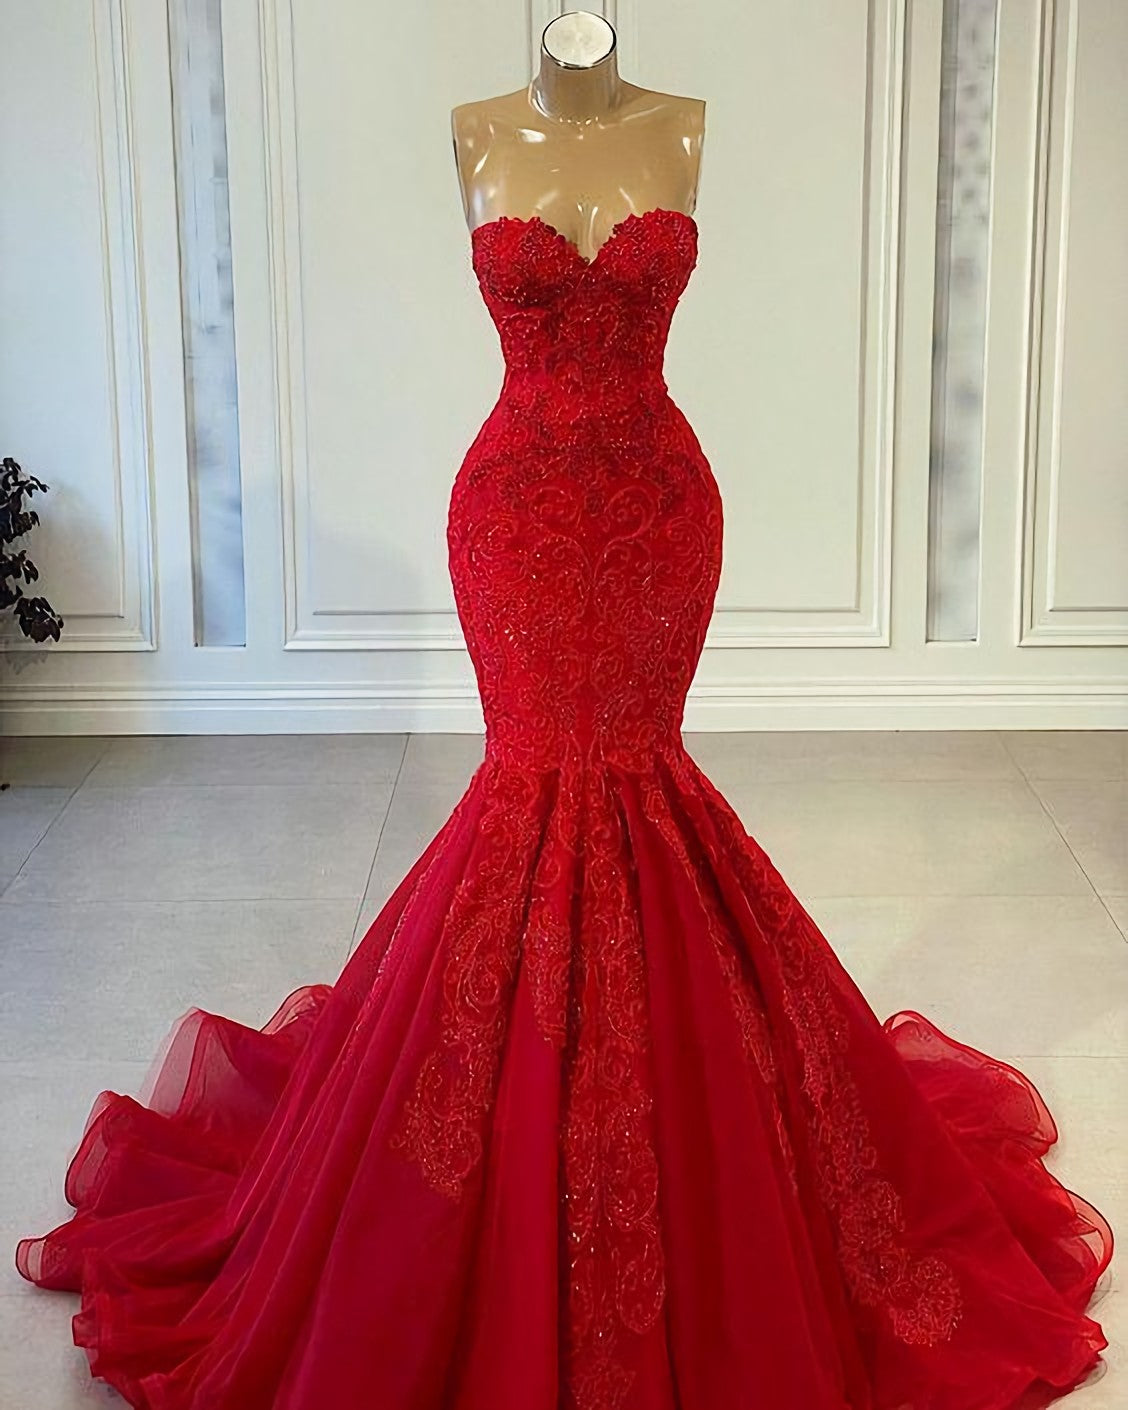 Corset Prom Dresses, Lace Corset Prom Dresses, Red Corset Prom Dresses, Evening Dresses outfit, Prom Dress With Pockets